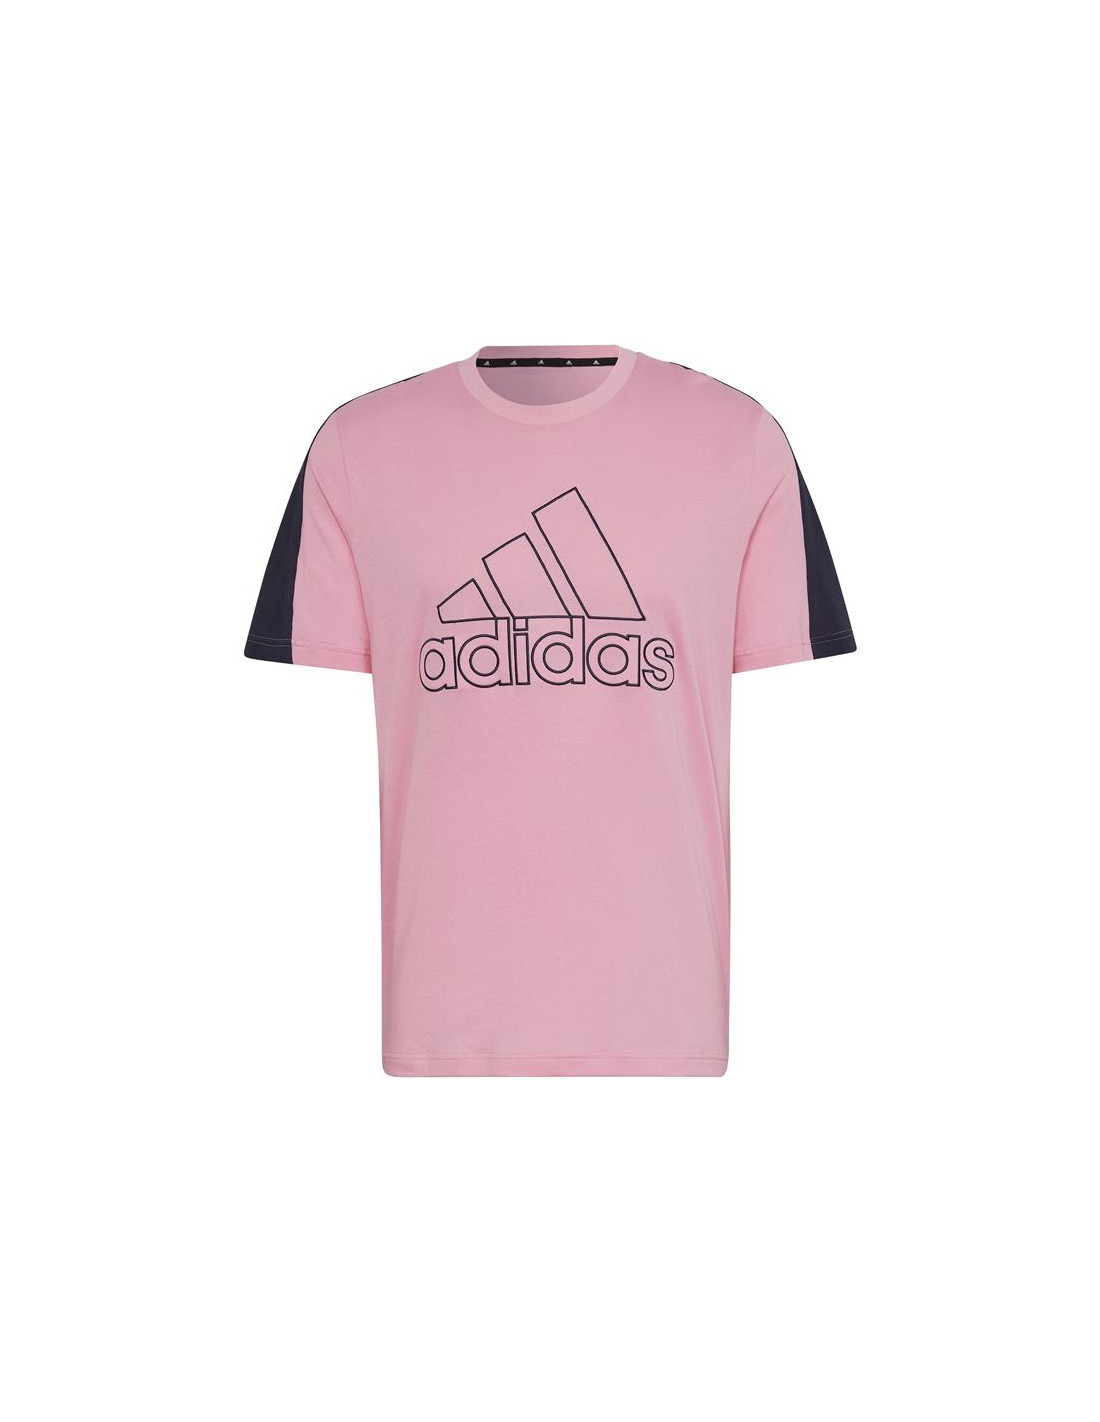 Camiseta adidas future icons embroidered hombre pink